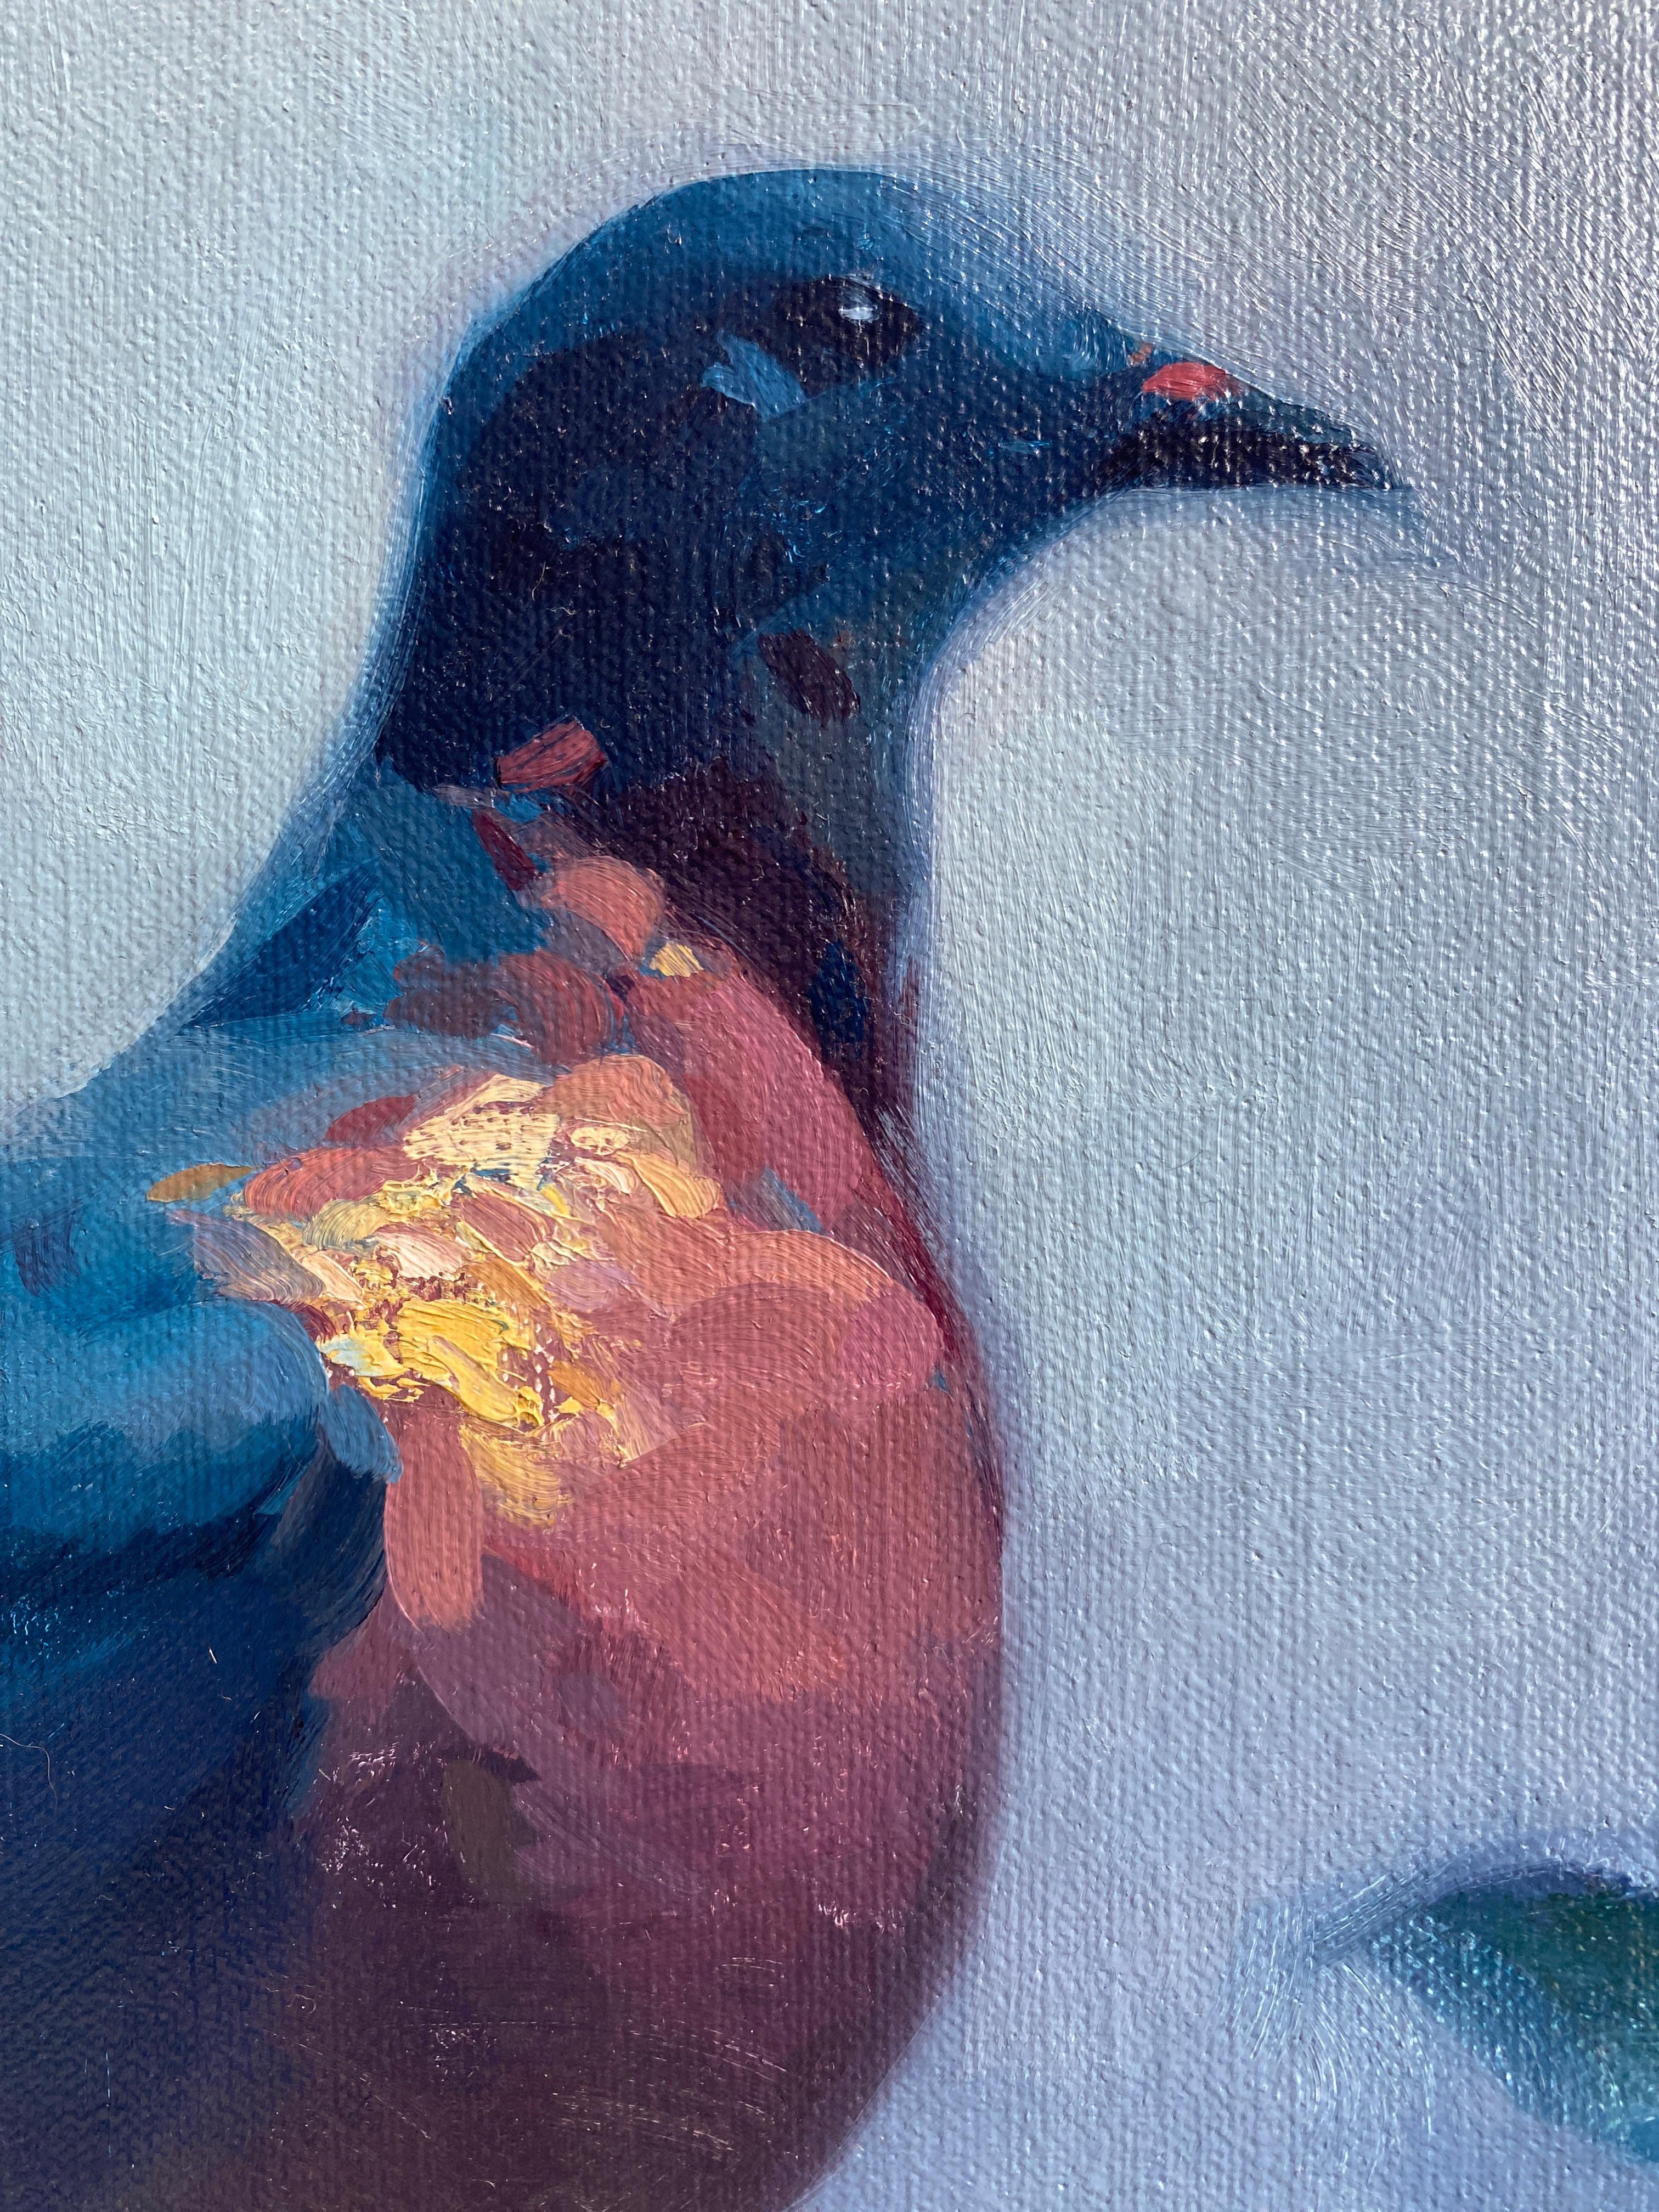 Carrier Pigeon - oil painting by American Realist, moody blue tones - Blue Portrait Painting by Stephen Bauman